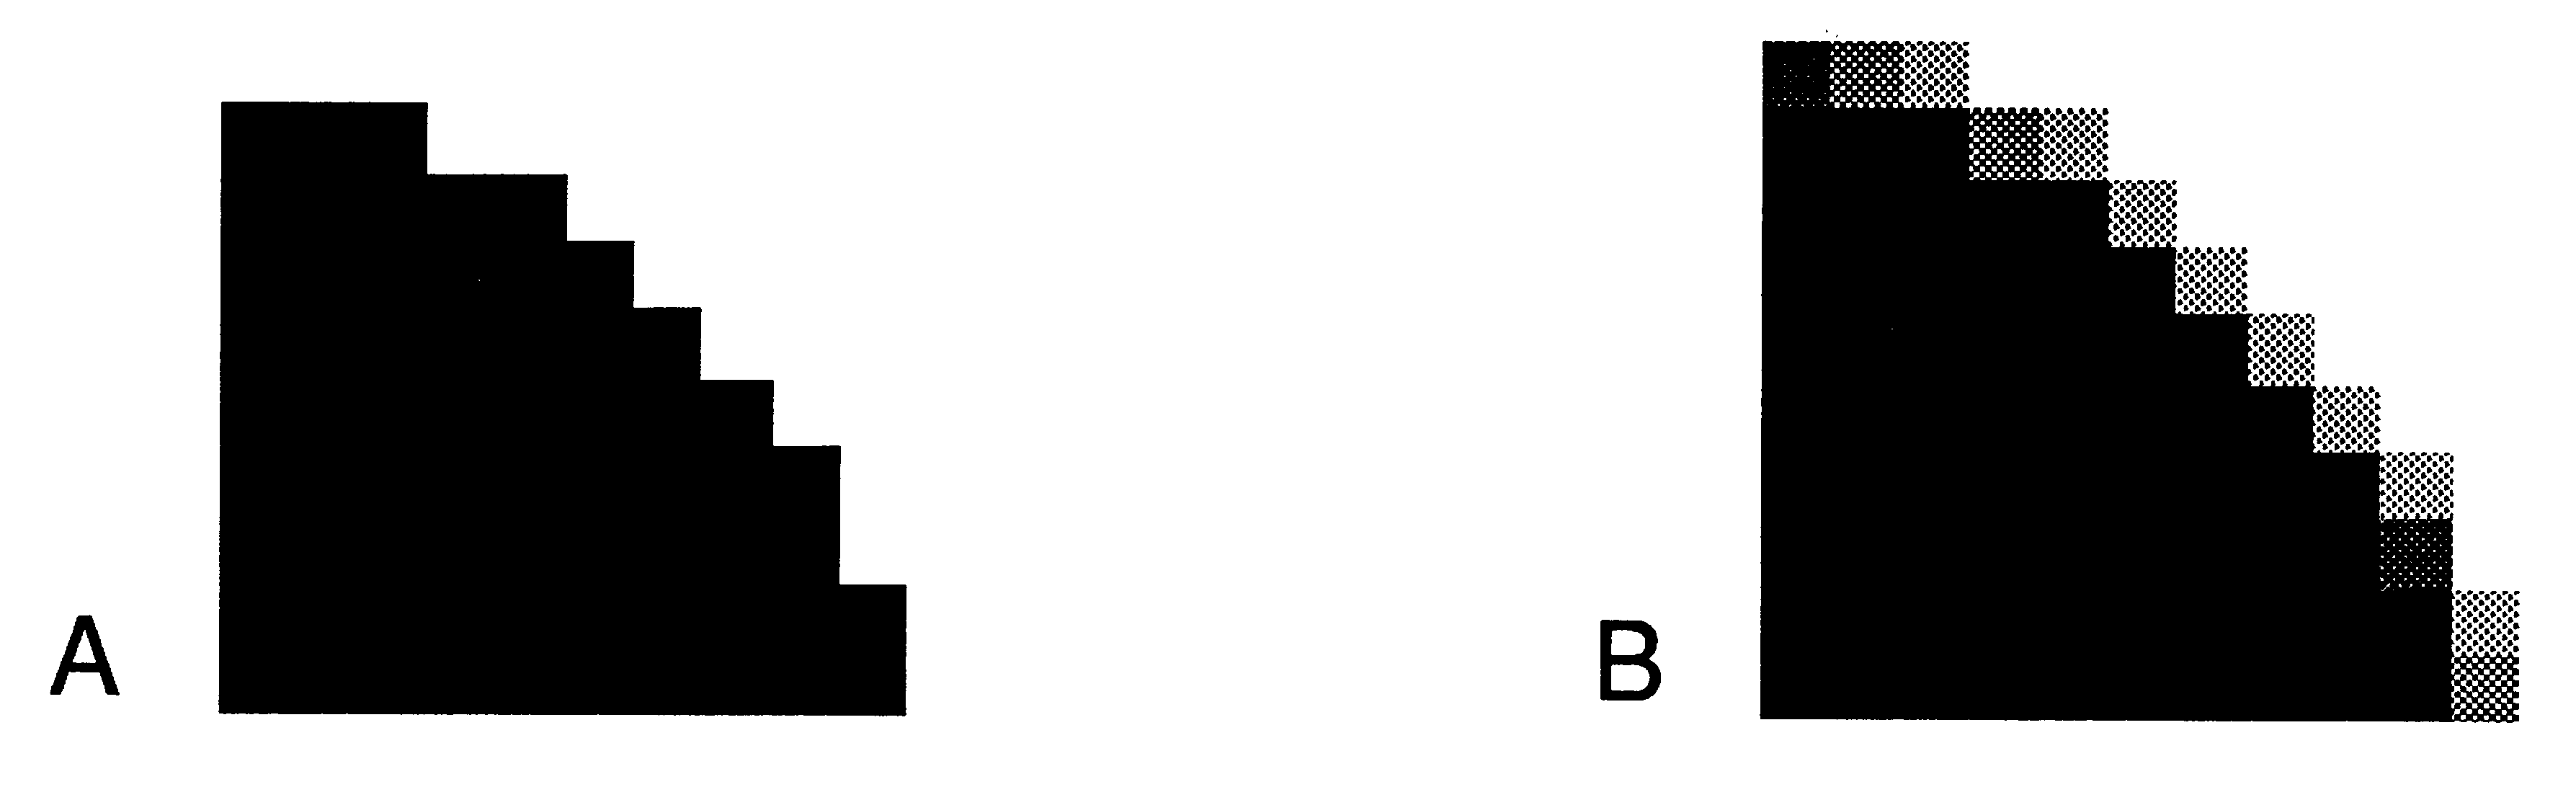 Magnified
object silhouette A) without and B) with anti-aliasing